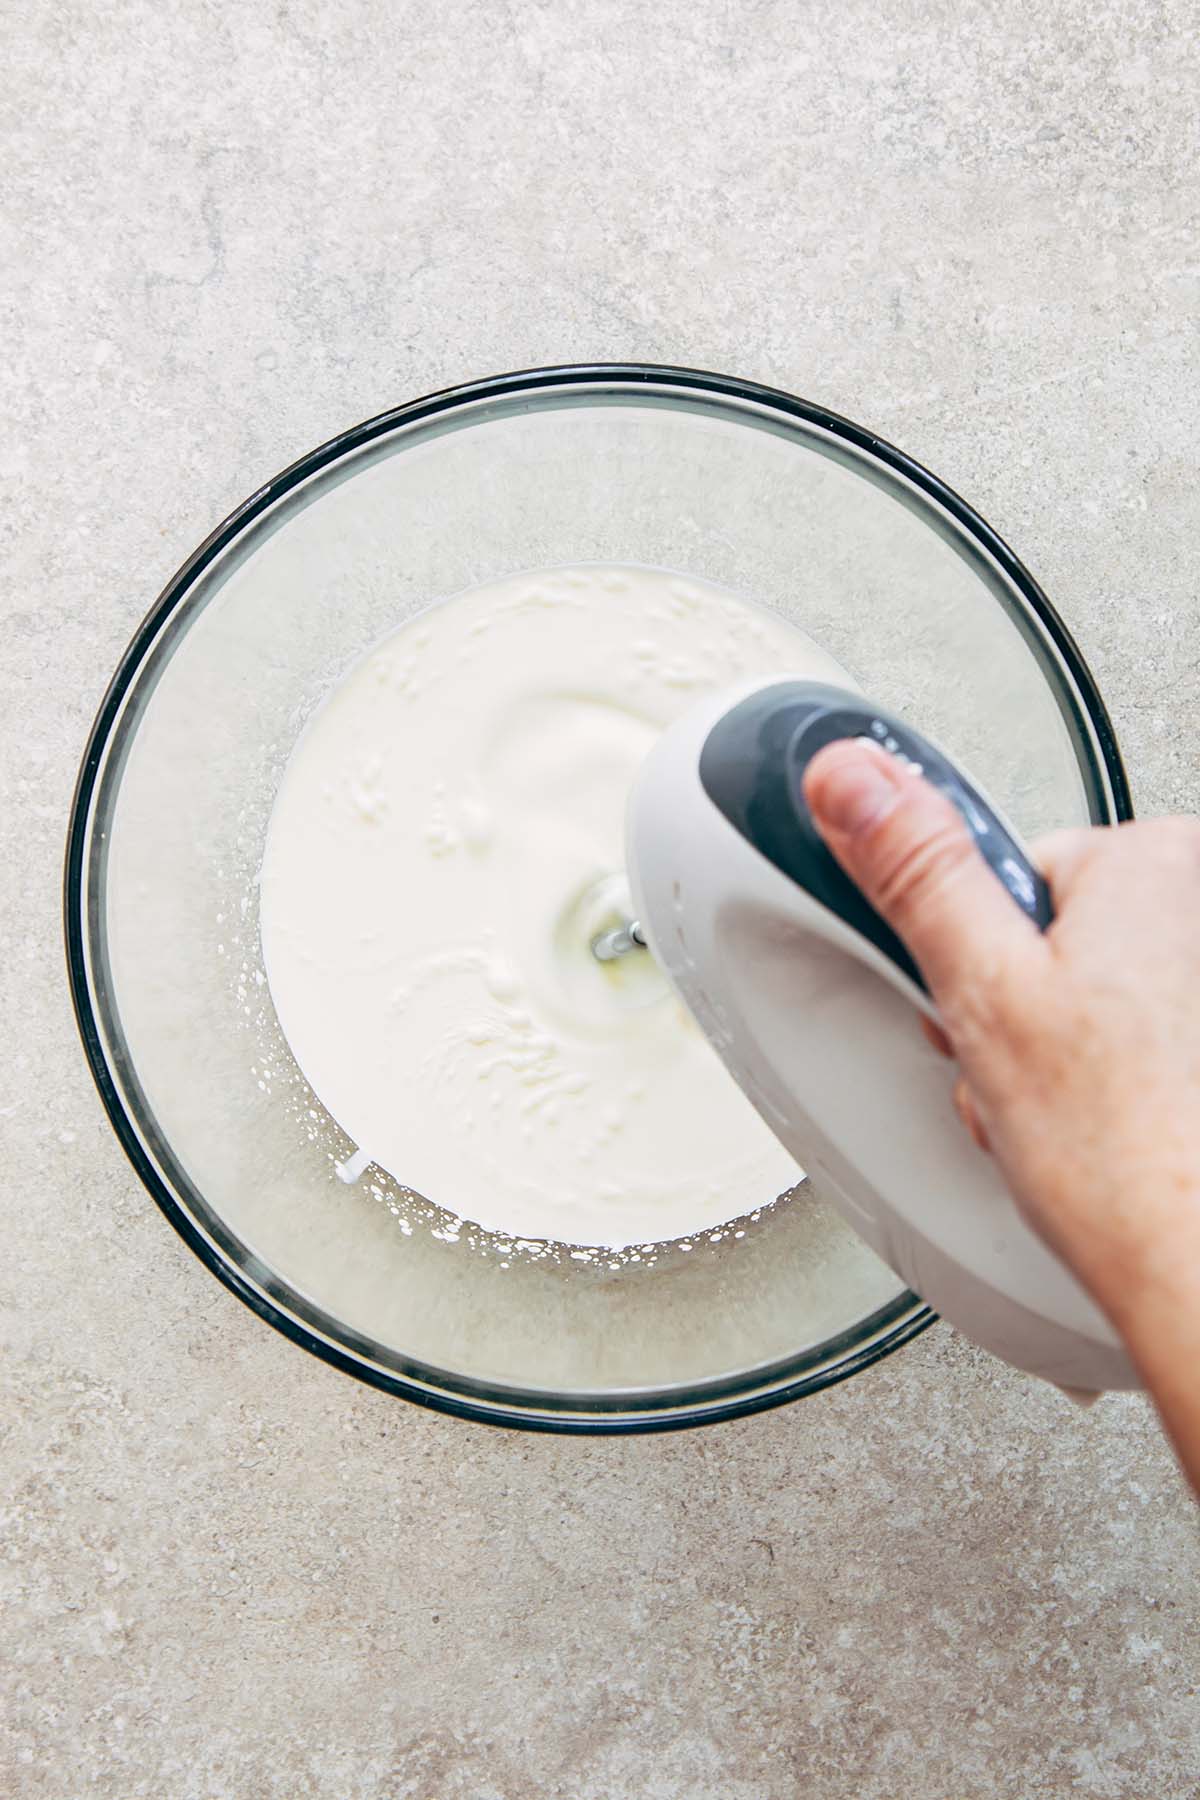 A hand using a hand mixer to whip cream.